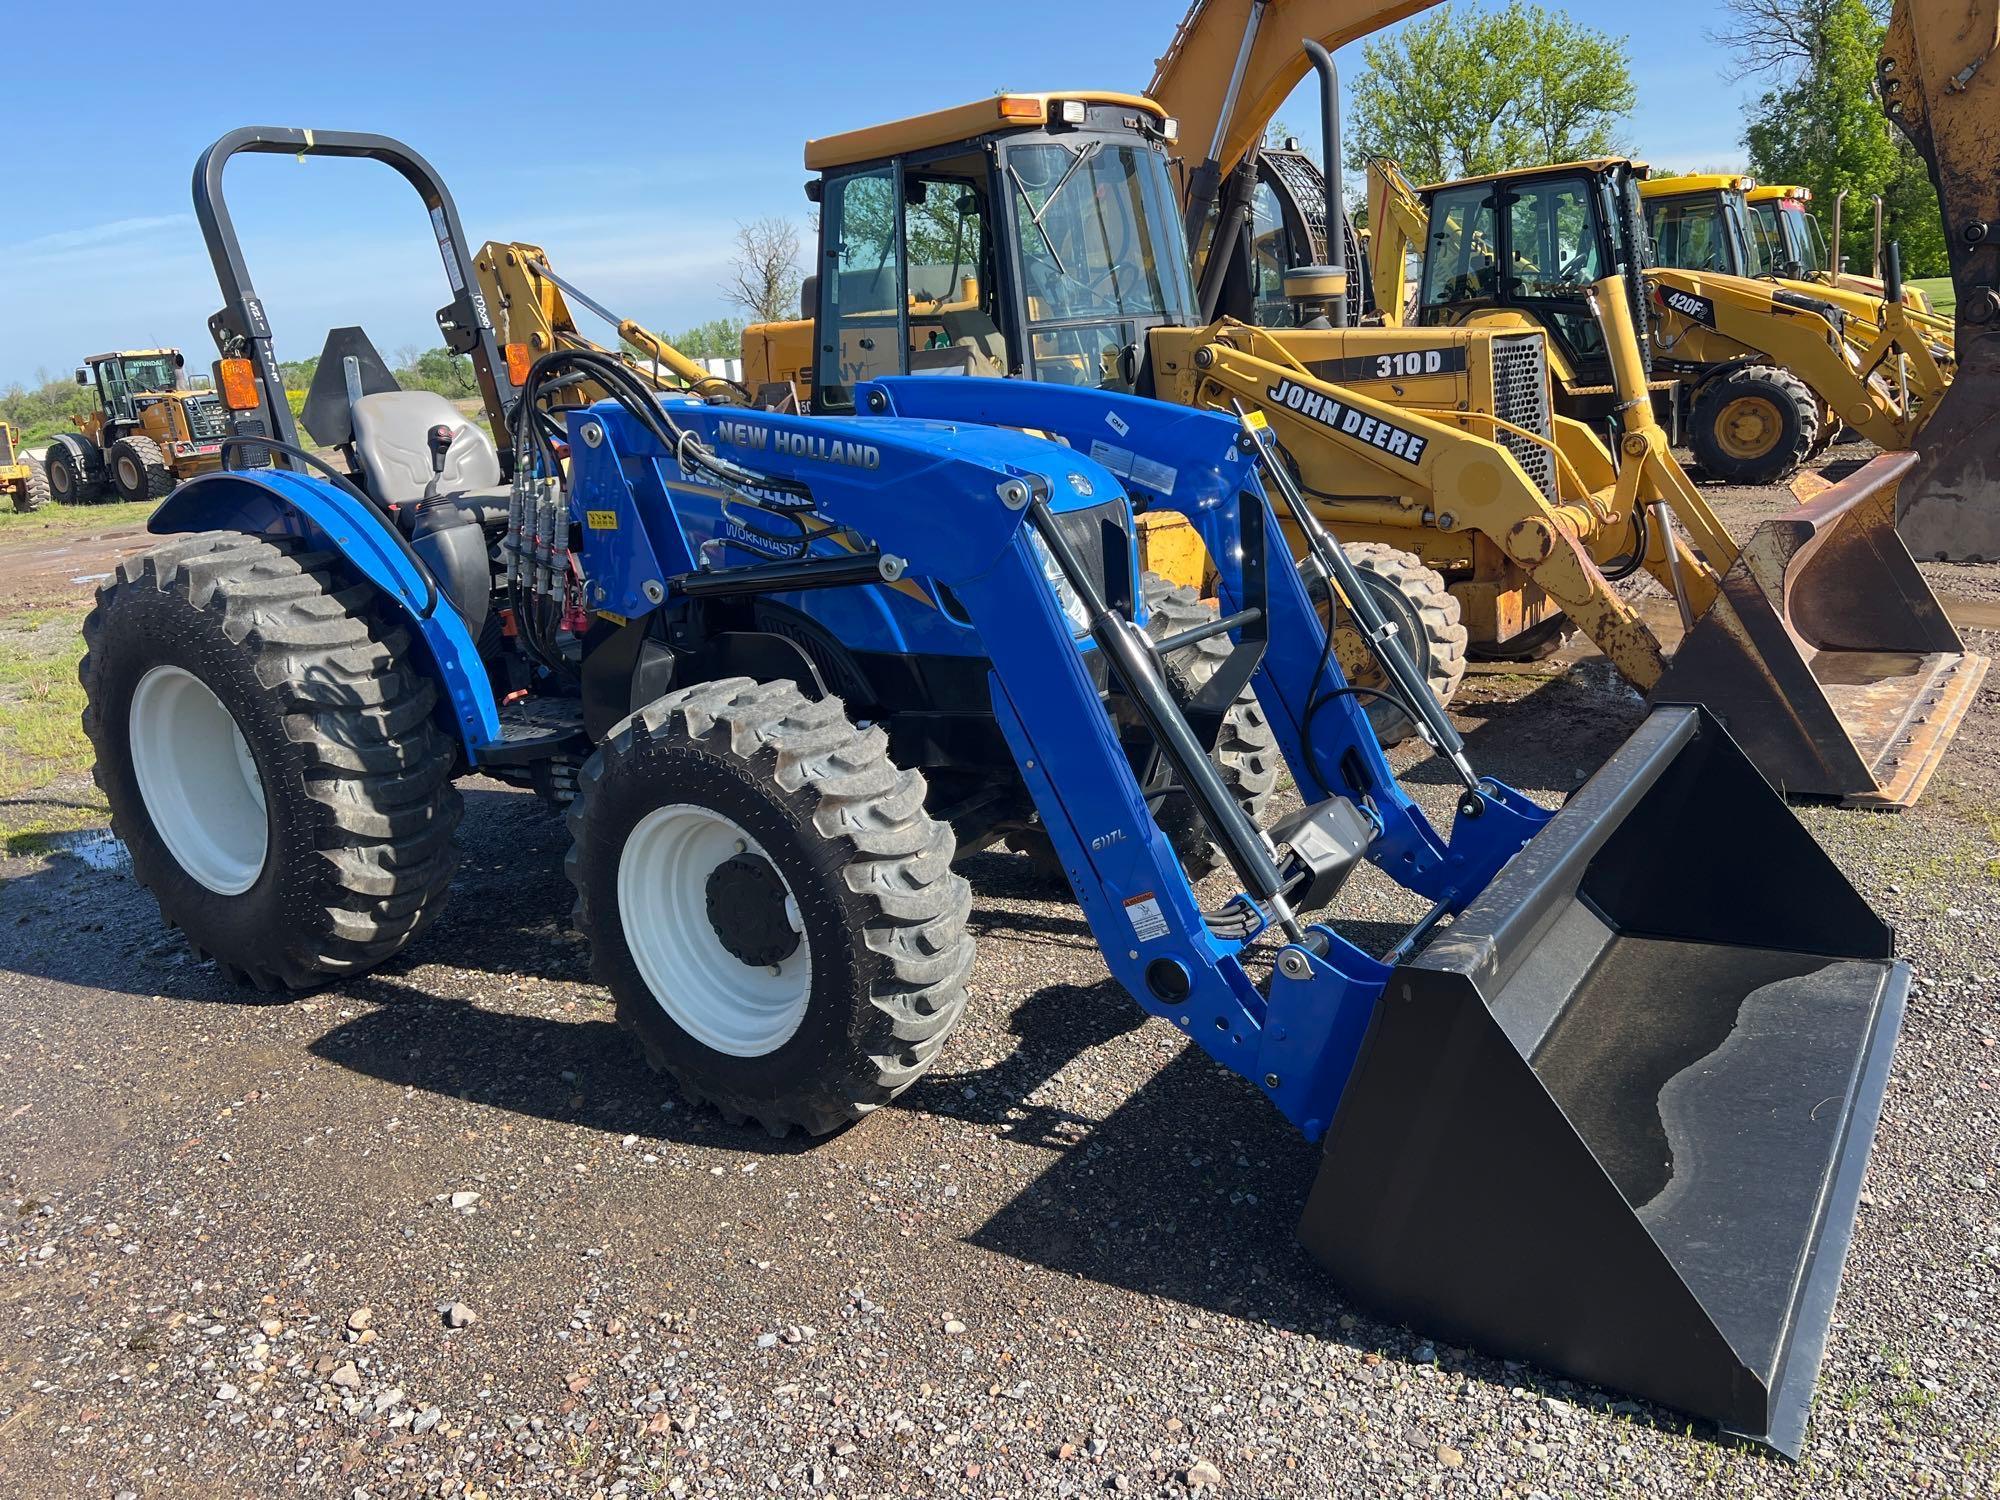 NEW NEW HOLLAND WORKMASTER 50 TRACTOR LOADER SN; NH5611773 4x4, powered by diesel engine, equipped